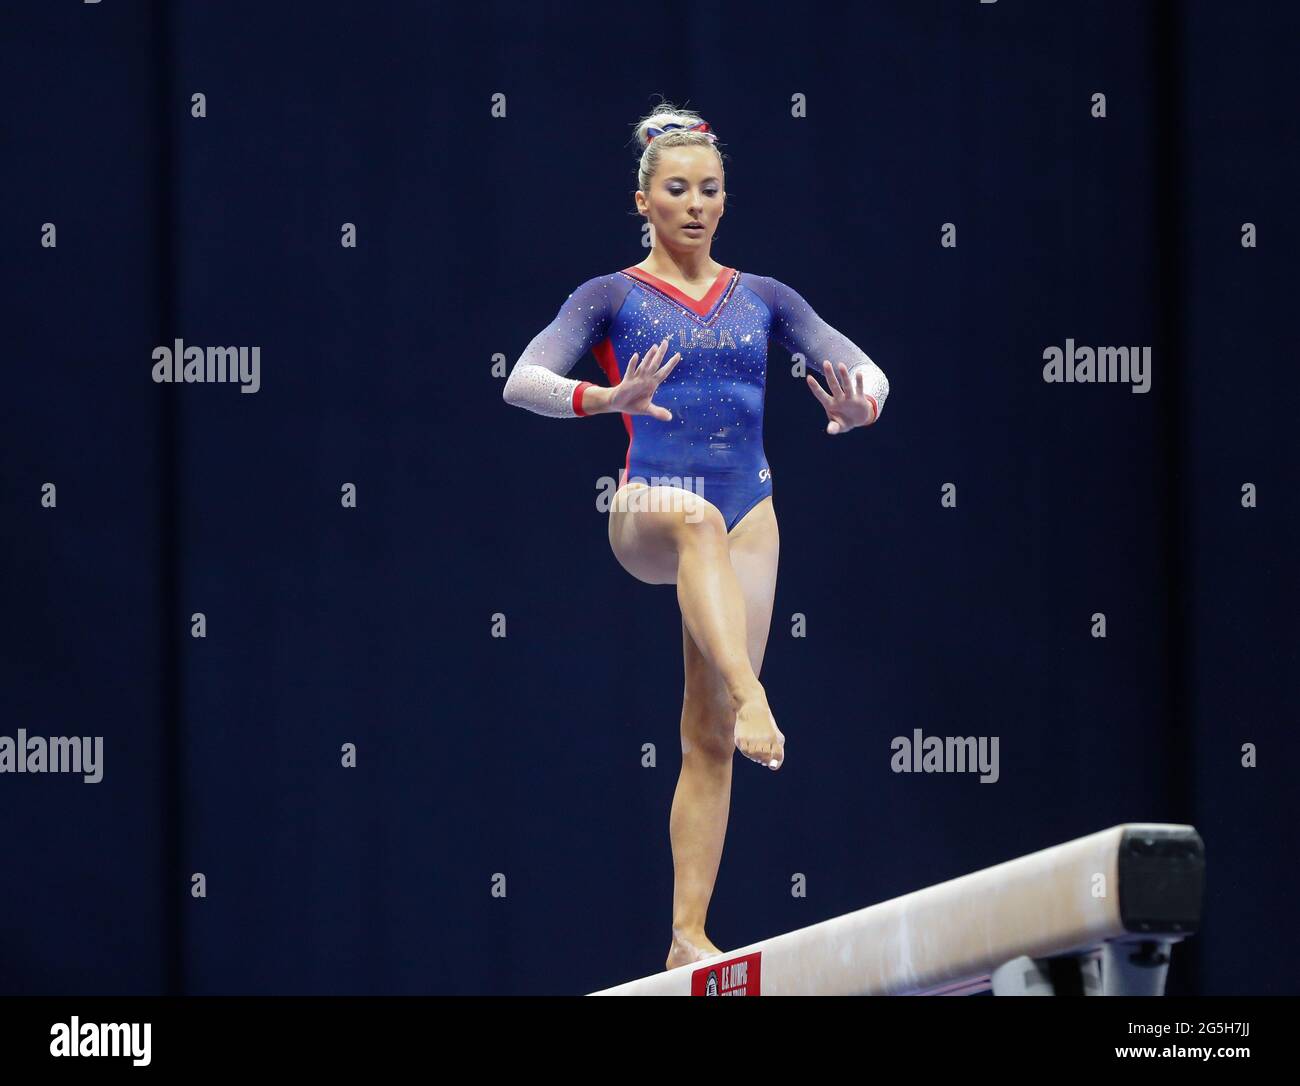 St Louis Usa June 27 2021 Mykayla Skinner Performs On The Balance Beam During Day 2 Of The 